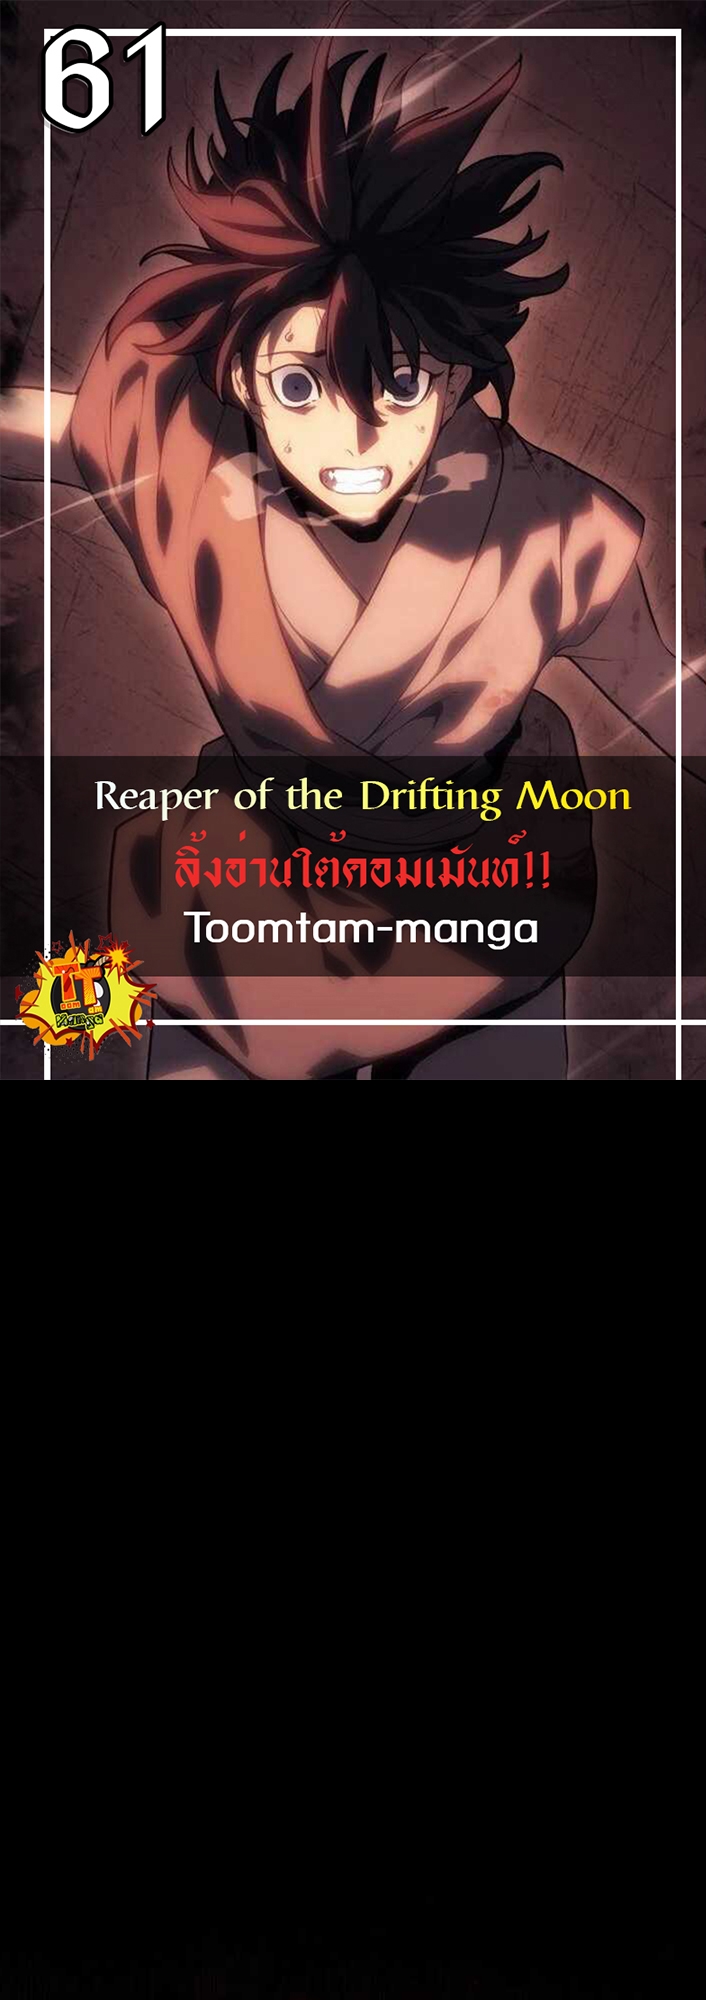 Reaper of the Drifting Moon 61 09 11 25660001